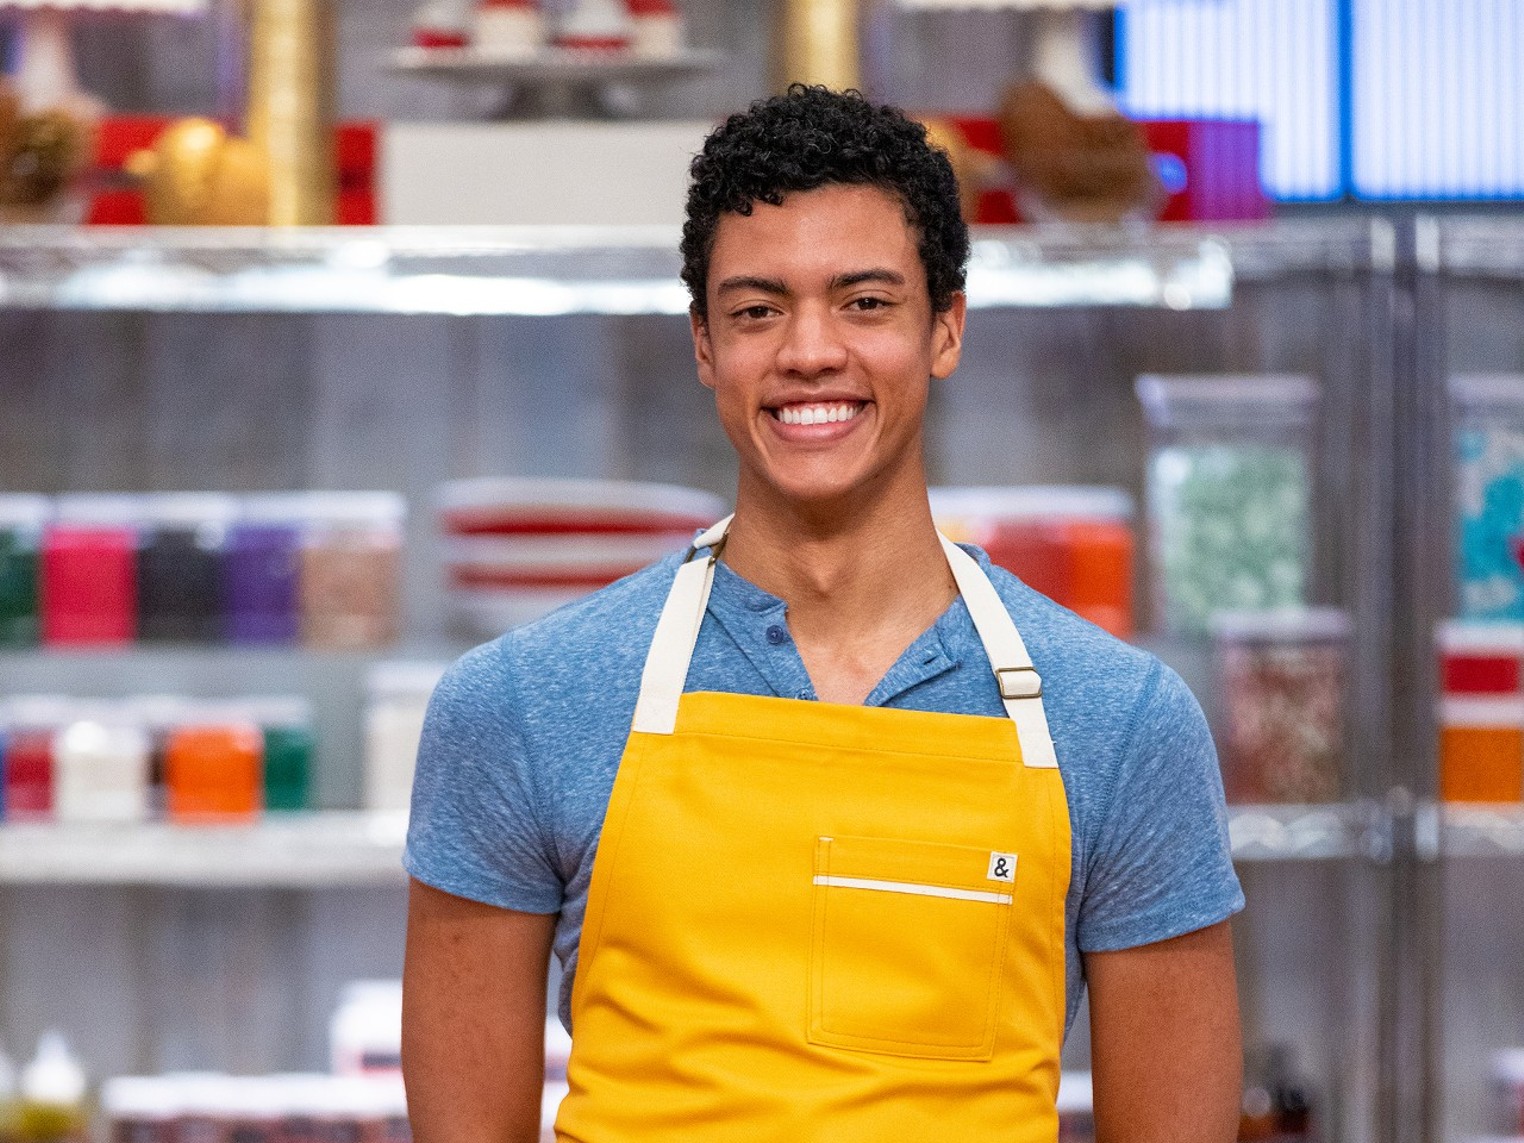 What It's Really Like to Be a Baker at the Kids Baking Championship